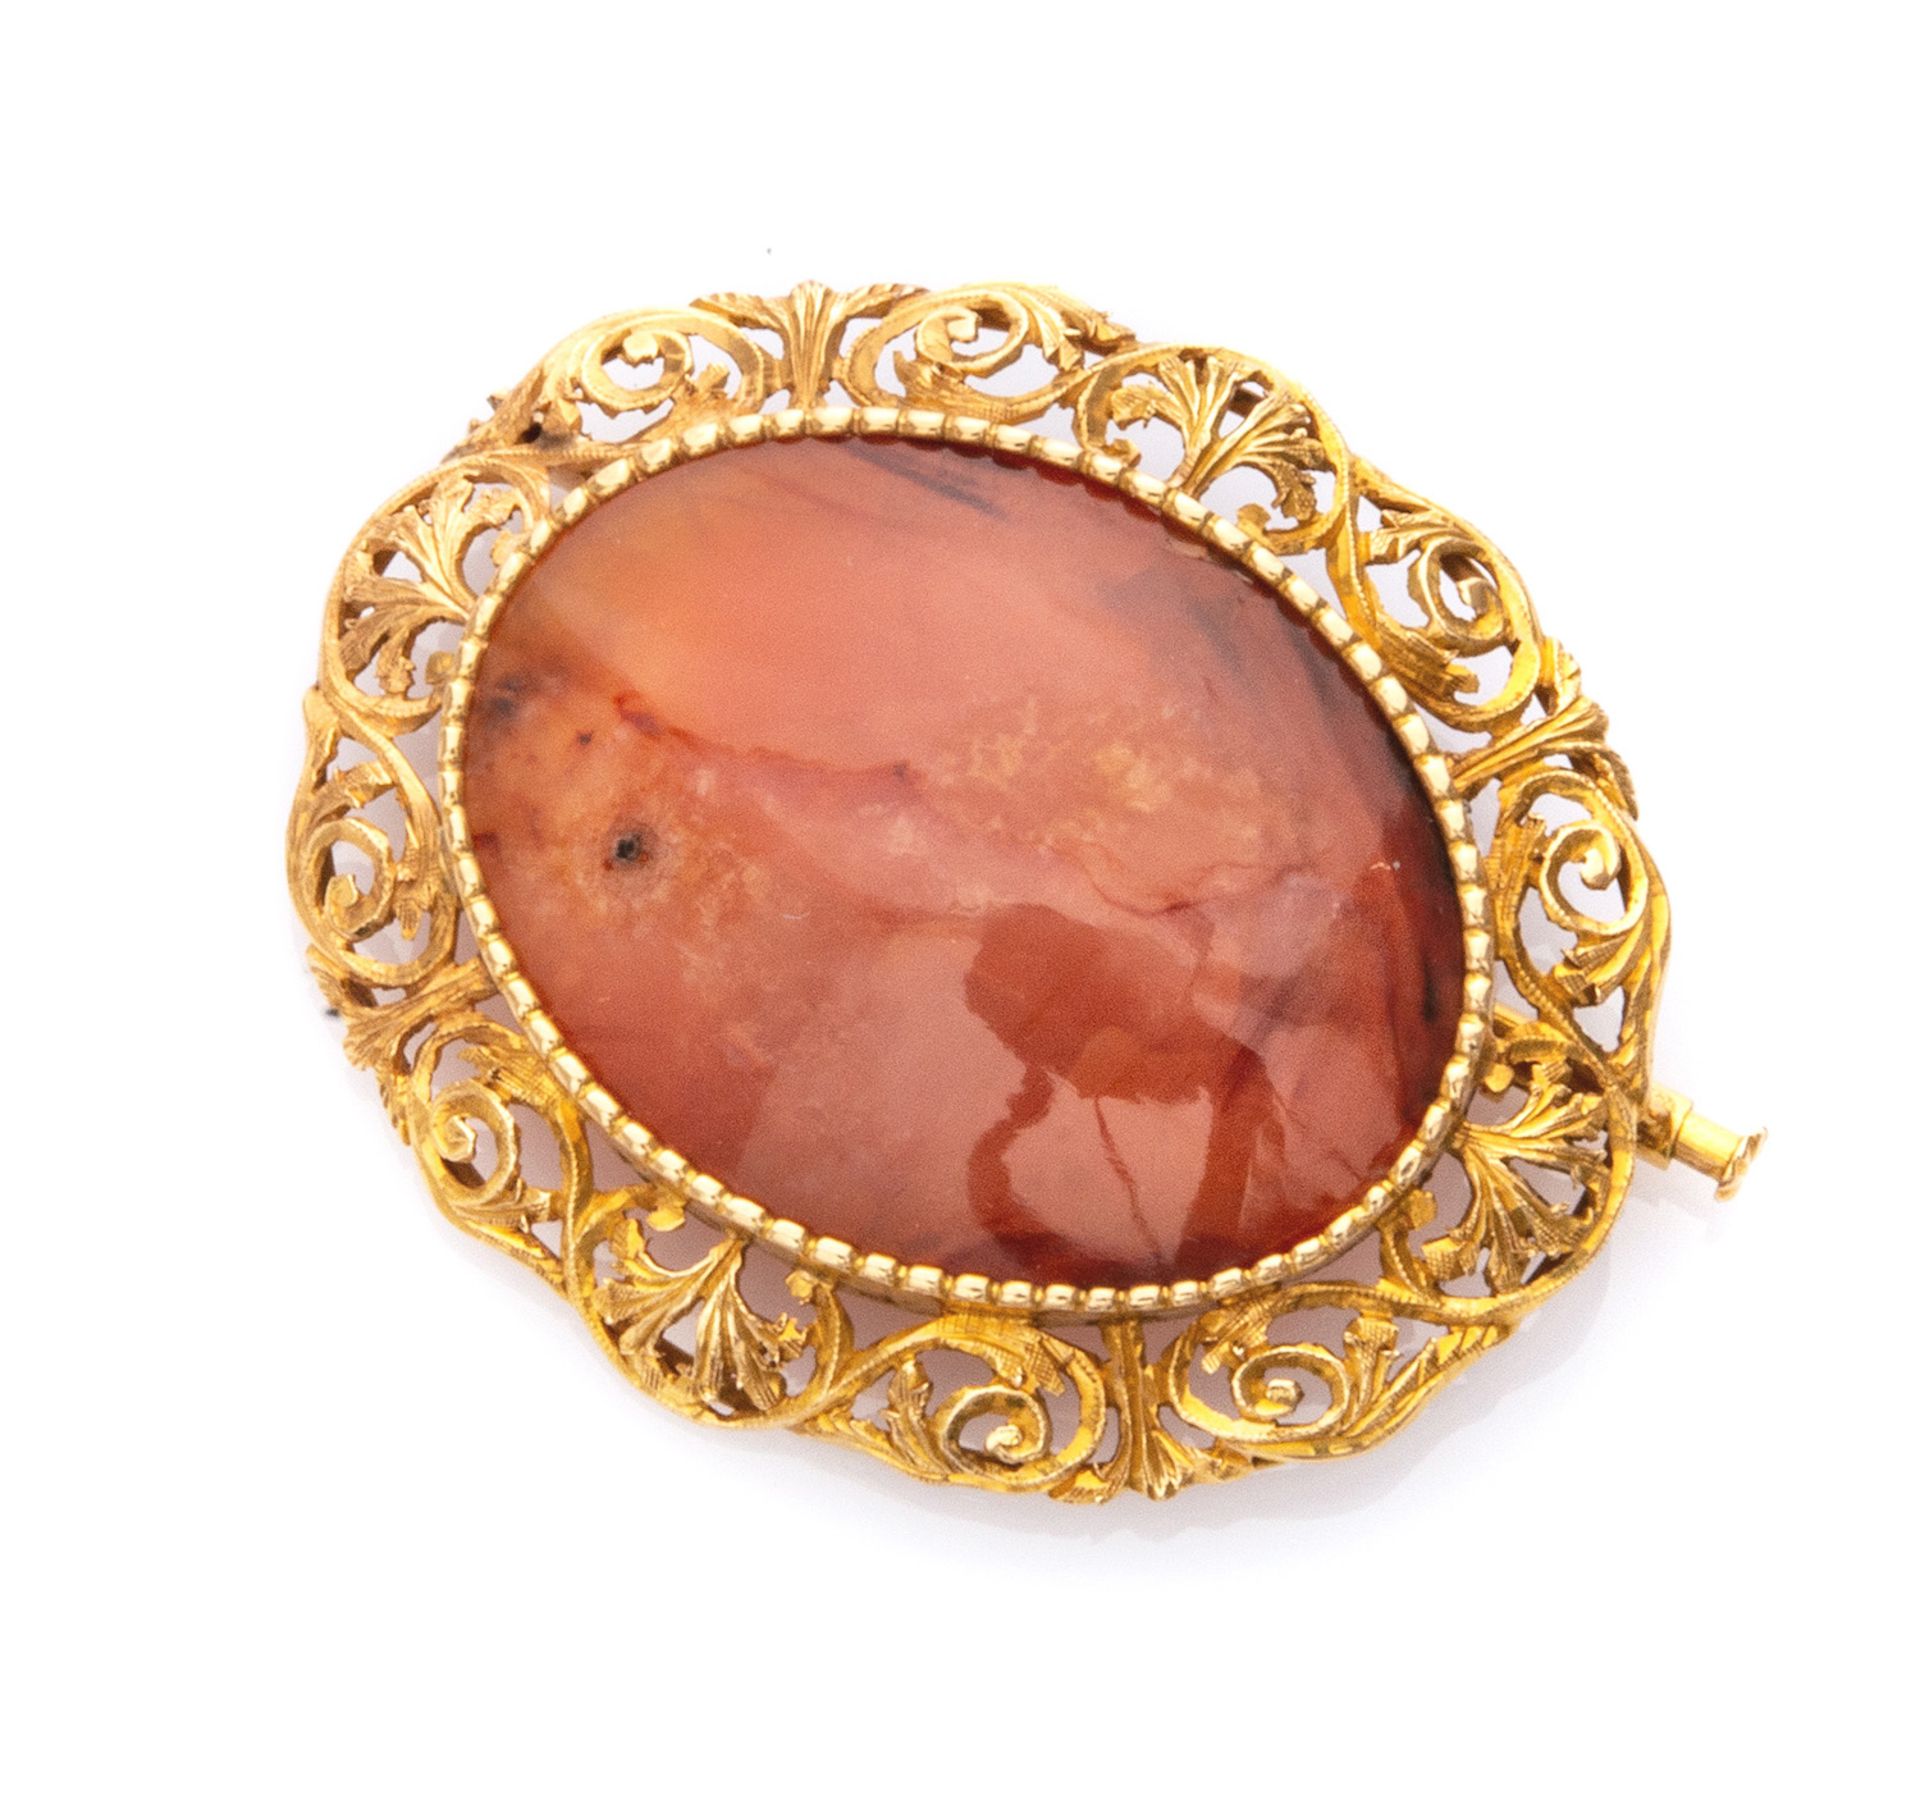 BROOCH with mount in yellow gold 18 kts., big central oval carnelian. Measures cm. 4,8 x 3,8,